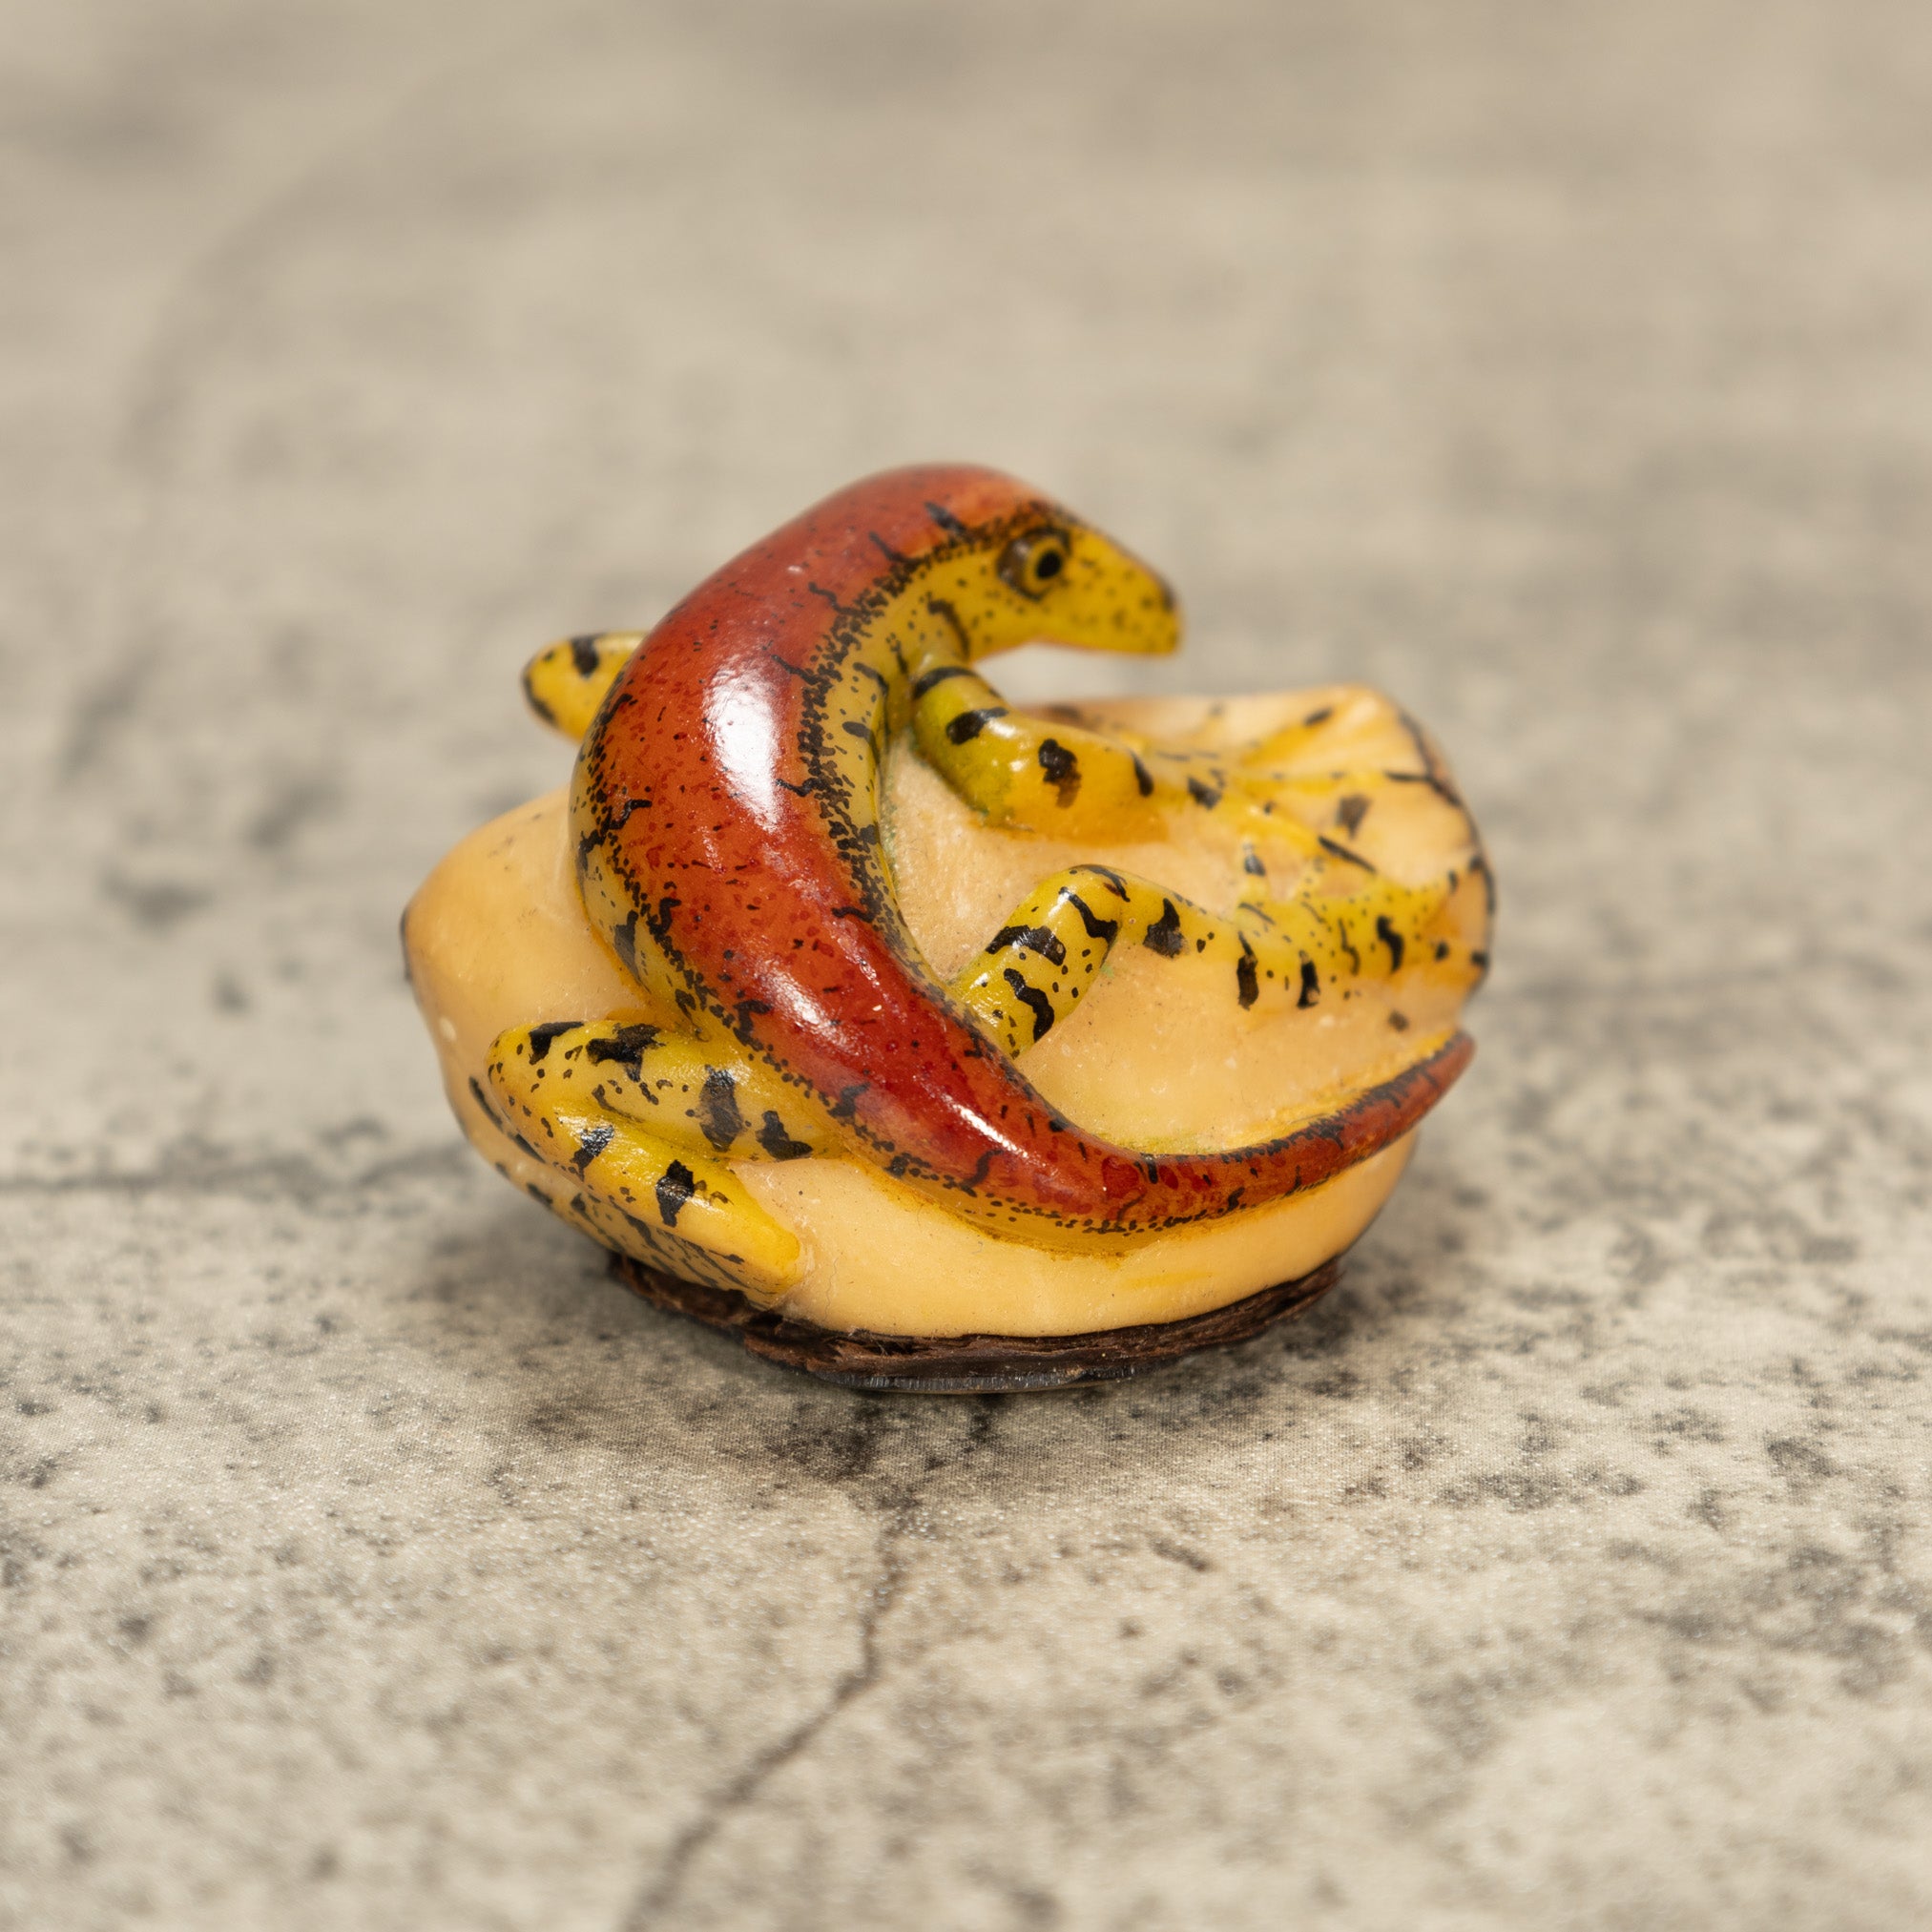 Red And Greenish Gecko Tagua Nut Carving